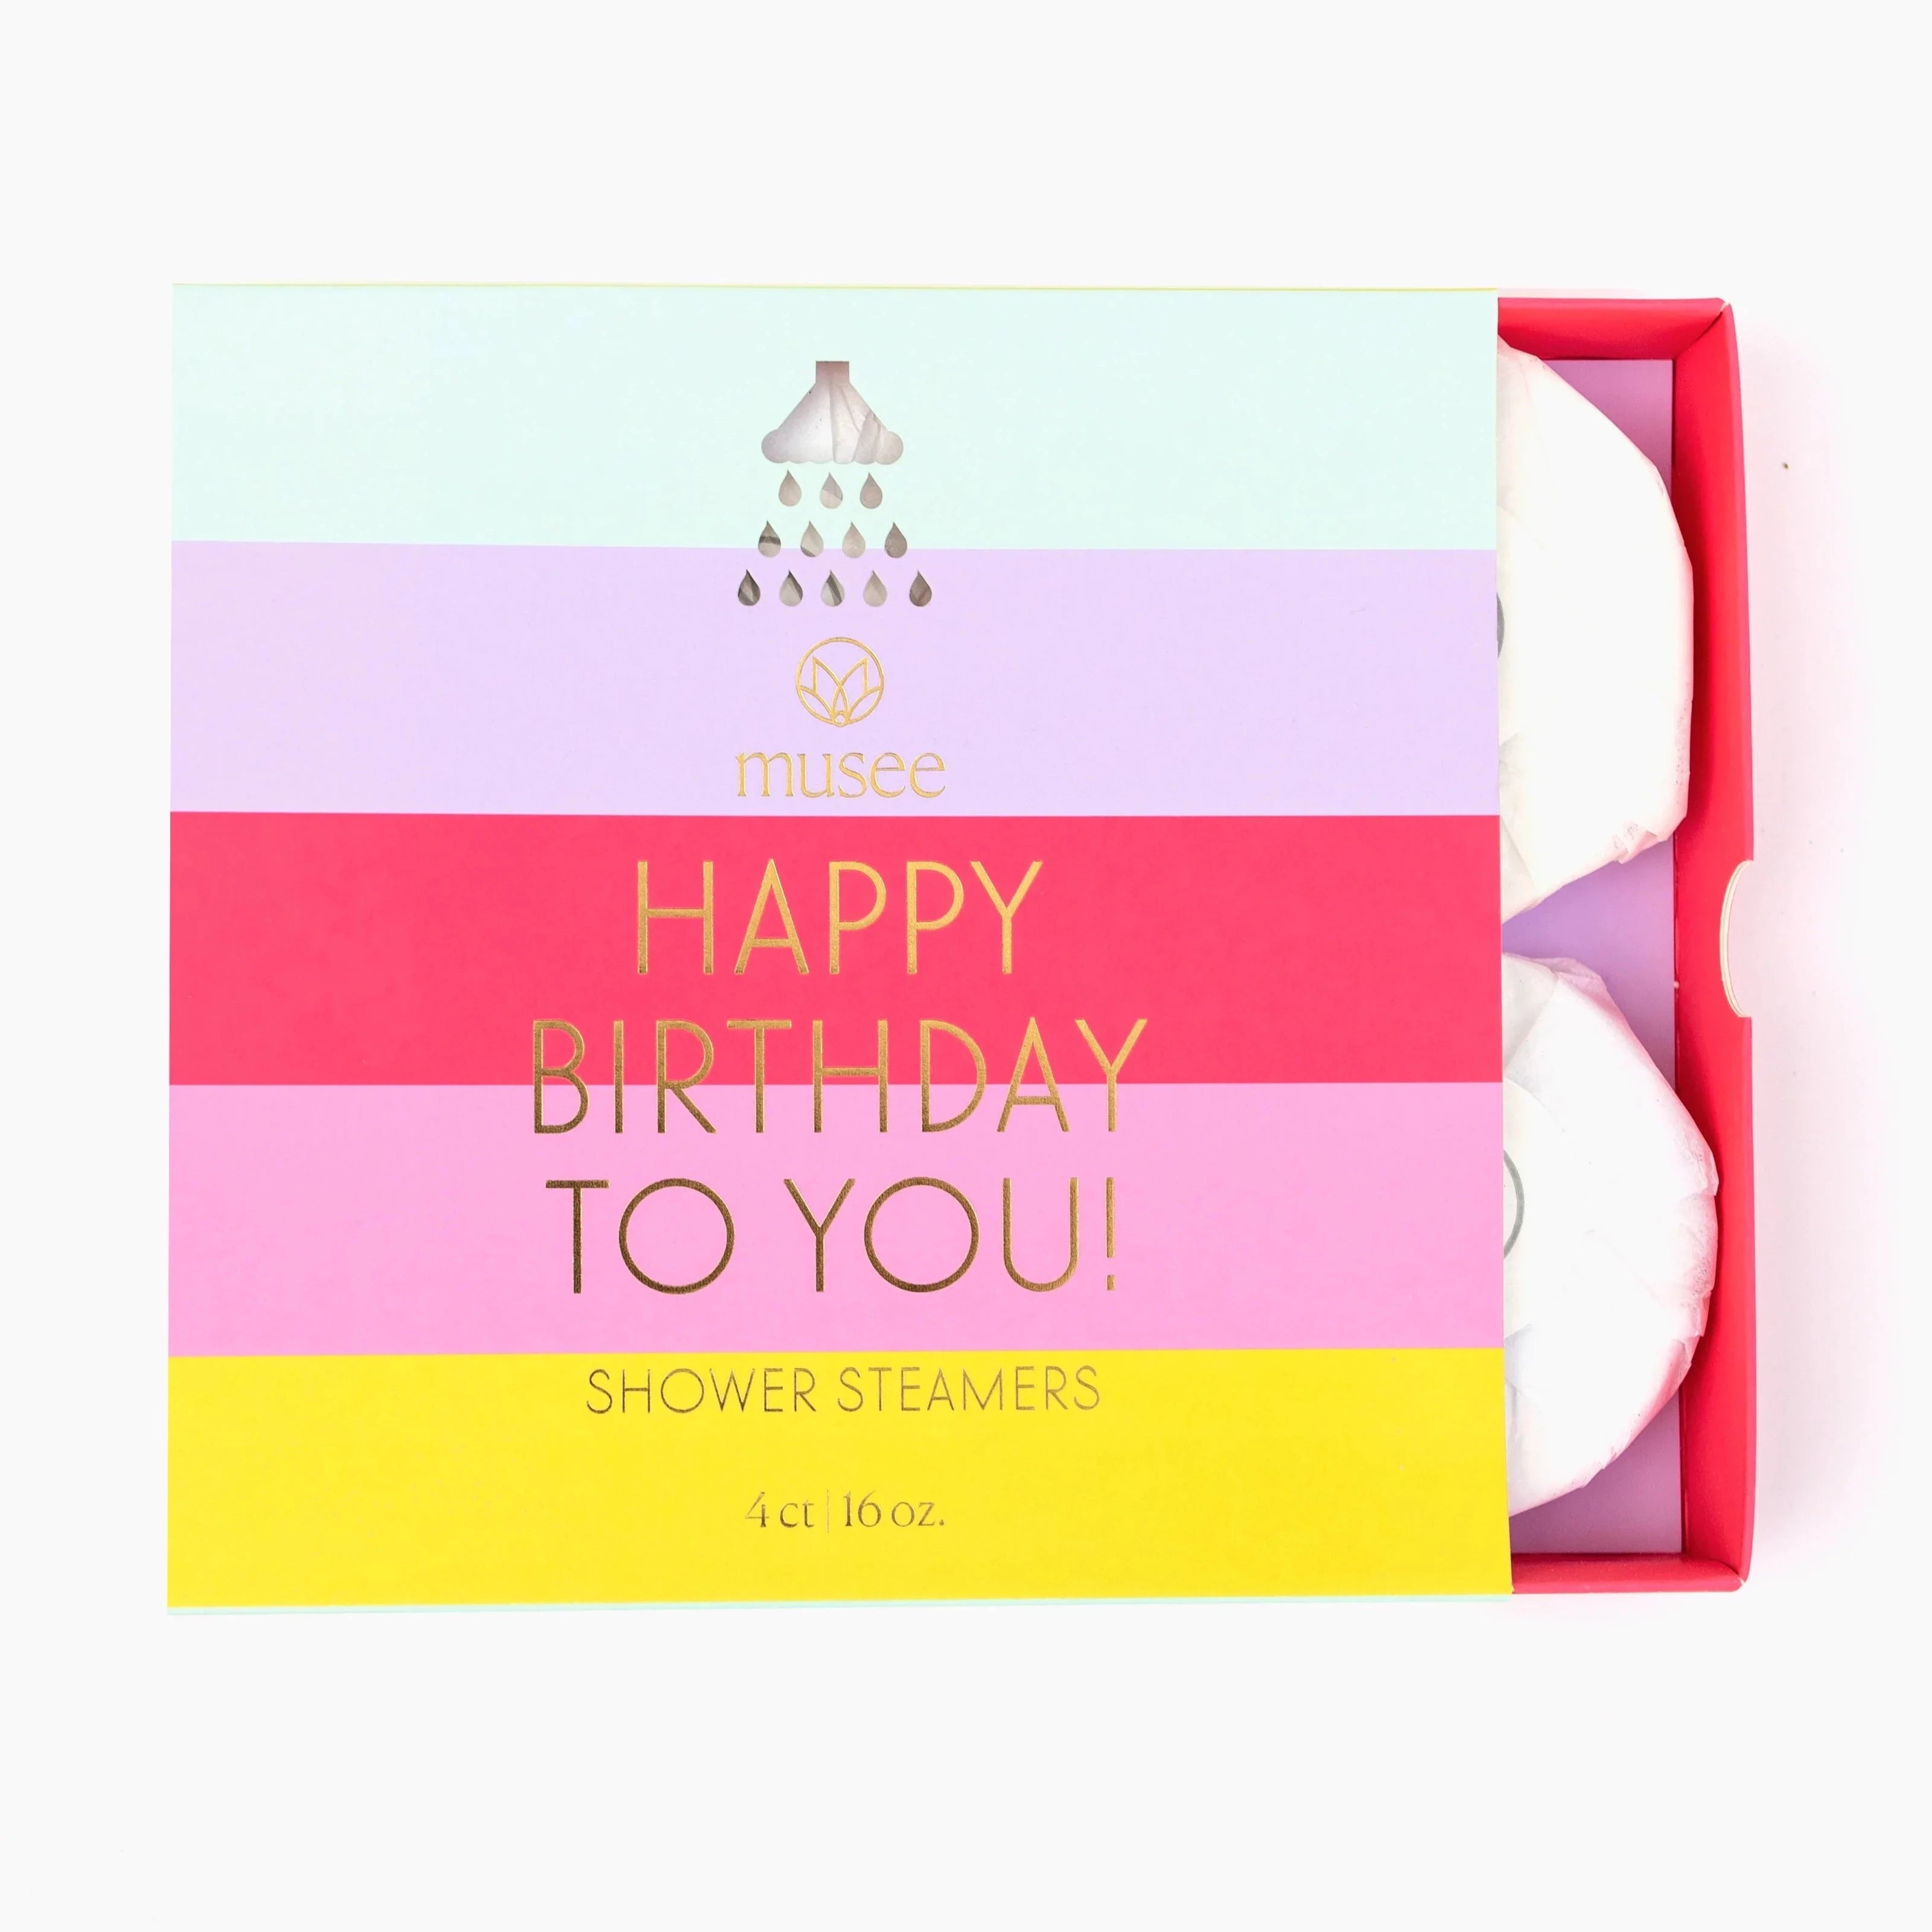 Shower steamer packaging with stripes across the from in Blue, purple, red, pink, and yellow. Gold text that reads "Happy Birthday to You Shower Steamers- 4ct" Box is slightly opened to show shower steamers inside that are wrapped in white paper